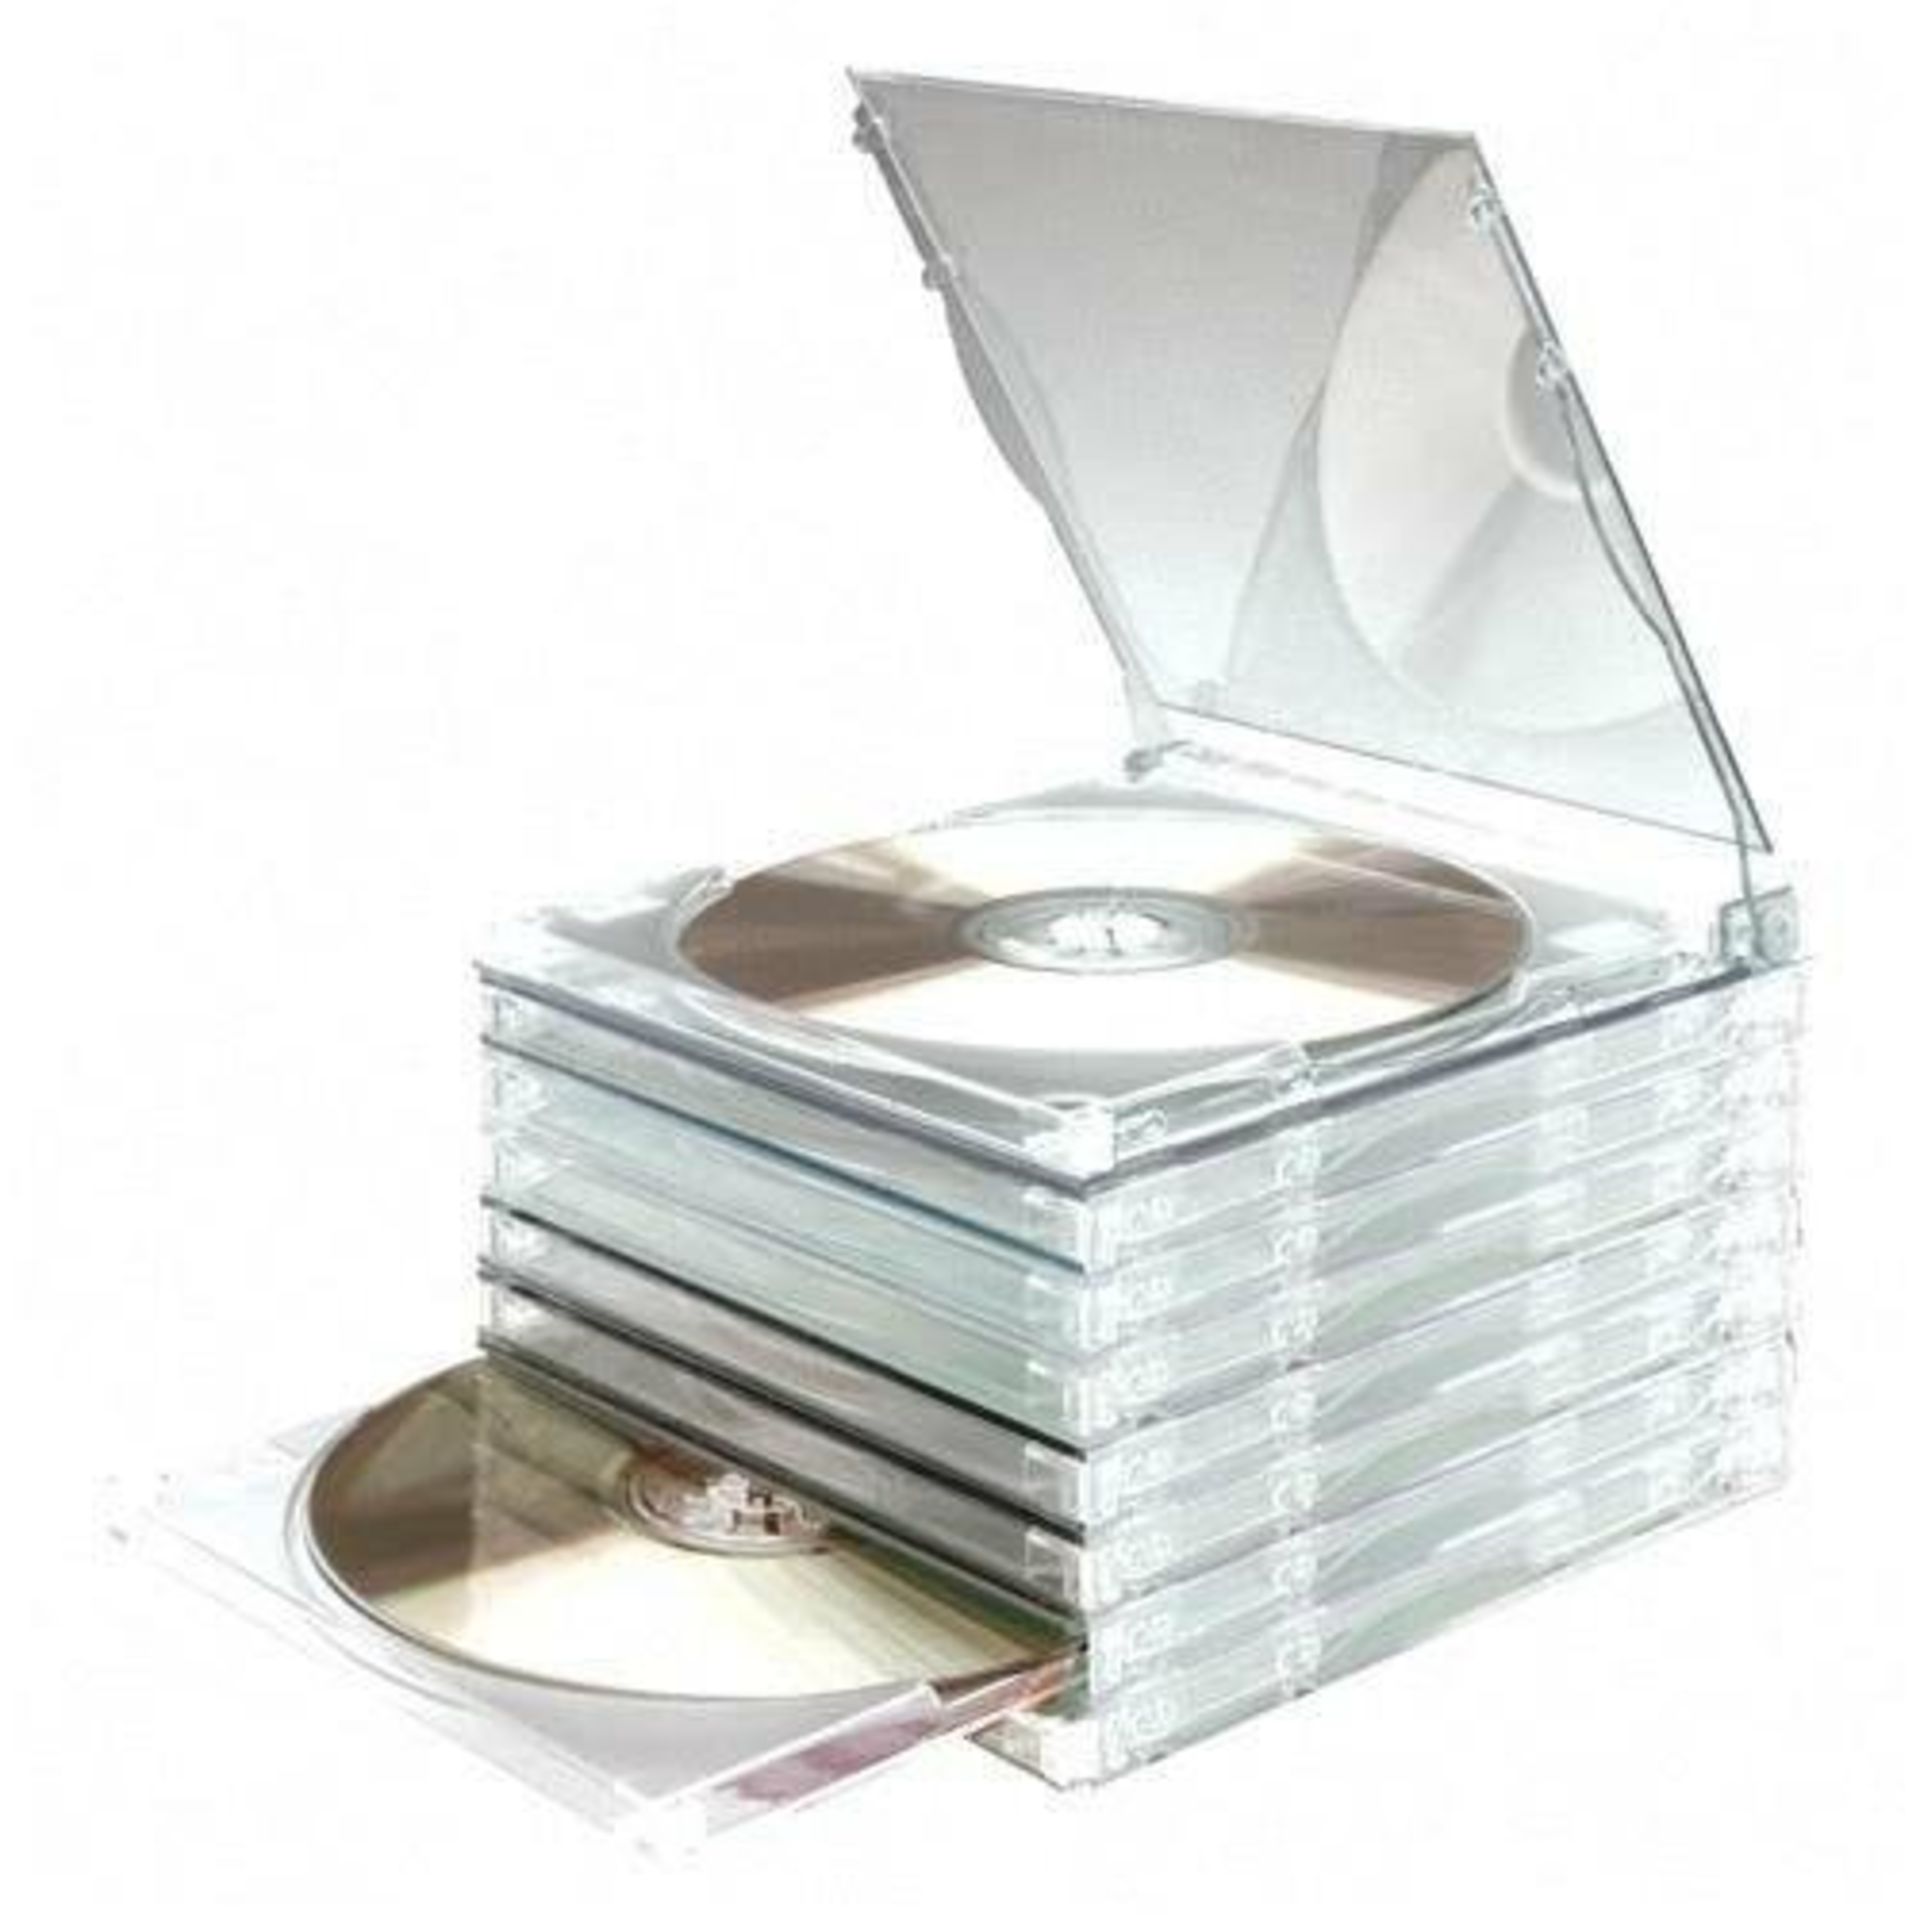 3 x Boxes of Compucessory Stackable CD Cases Code 95500 - 300 Cases in Total (RRP £6.65 Each)